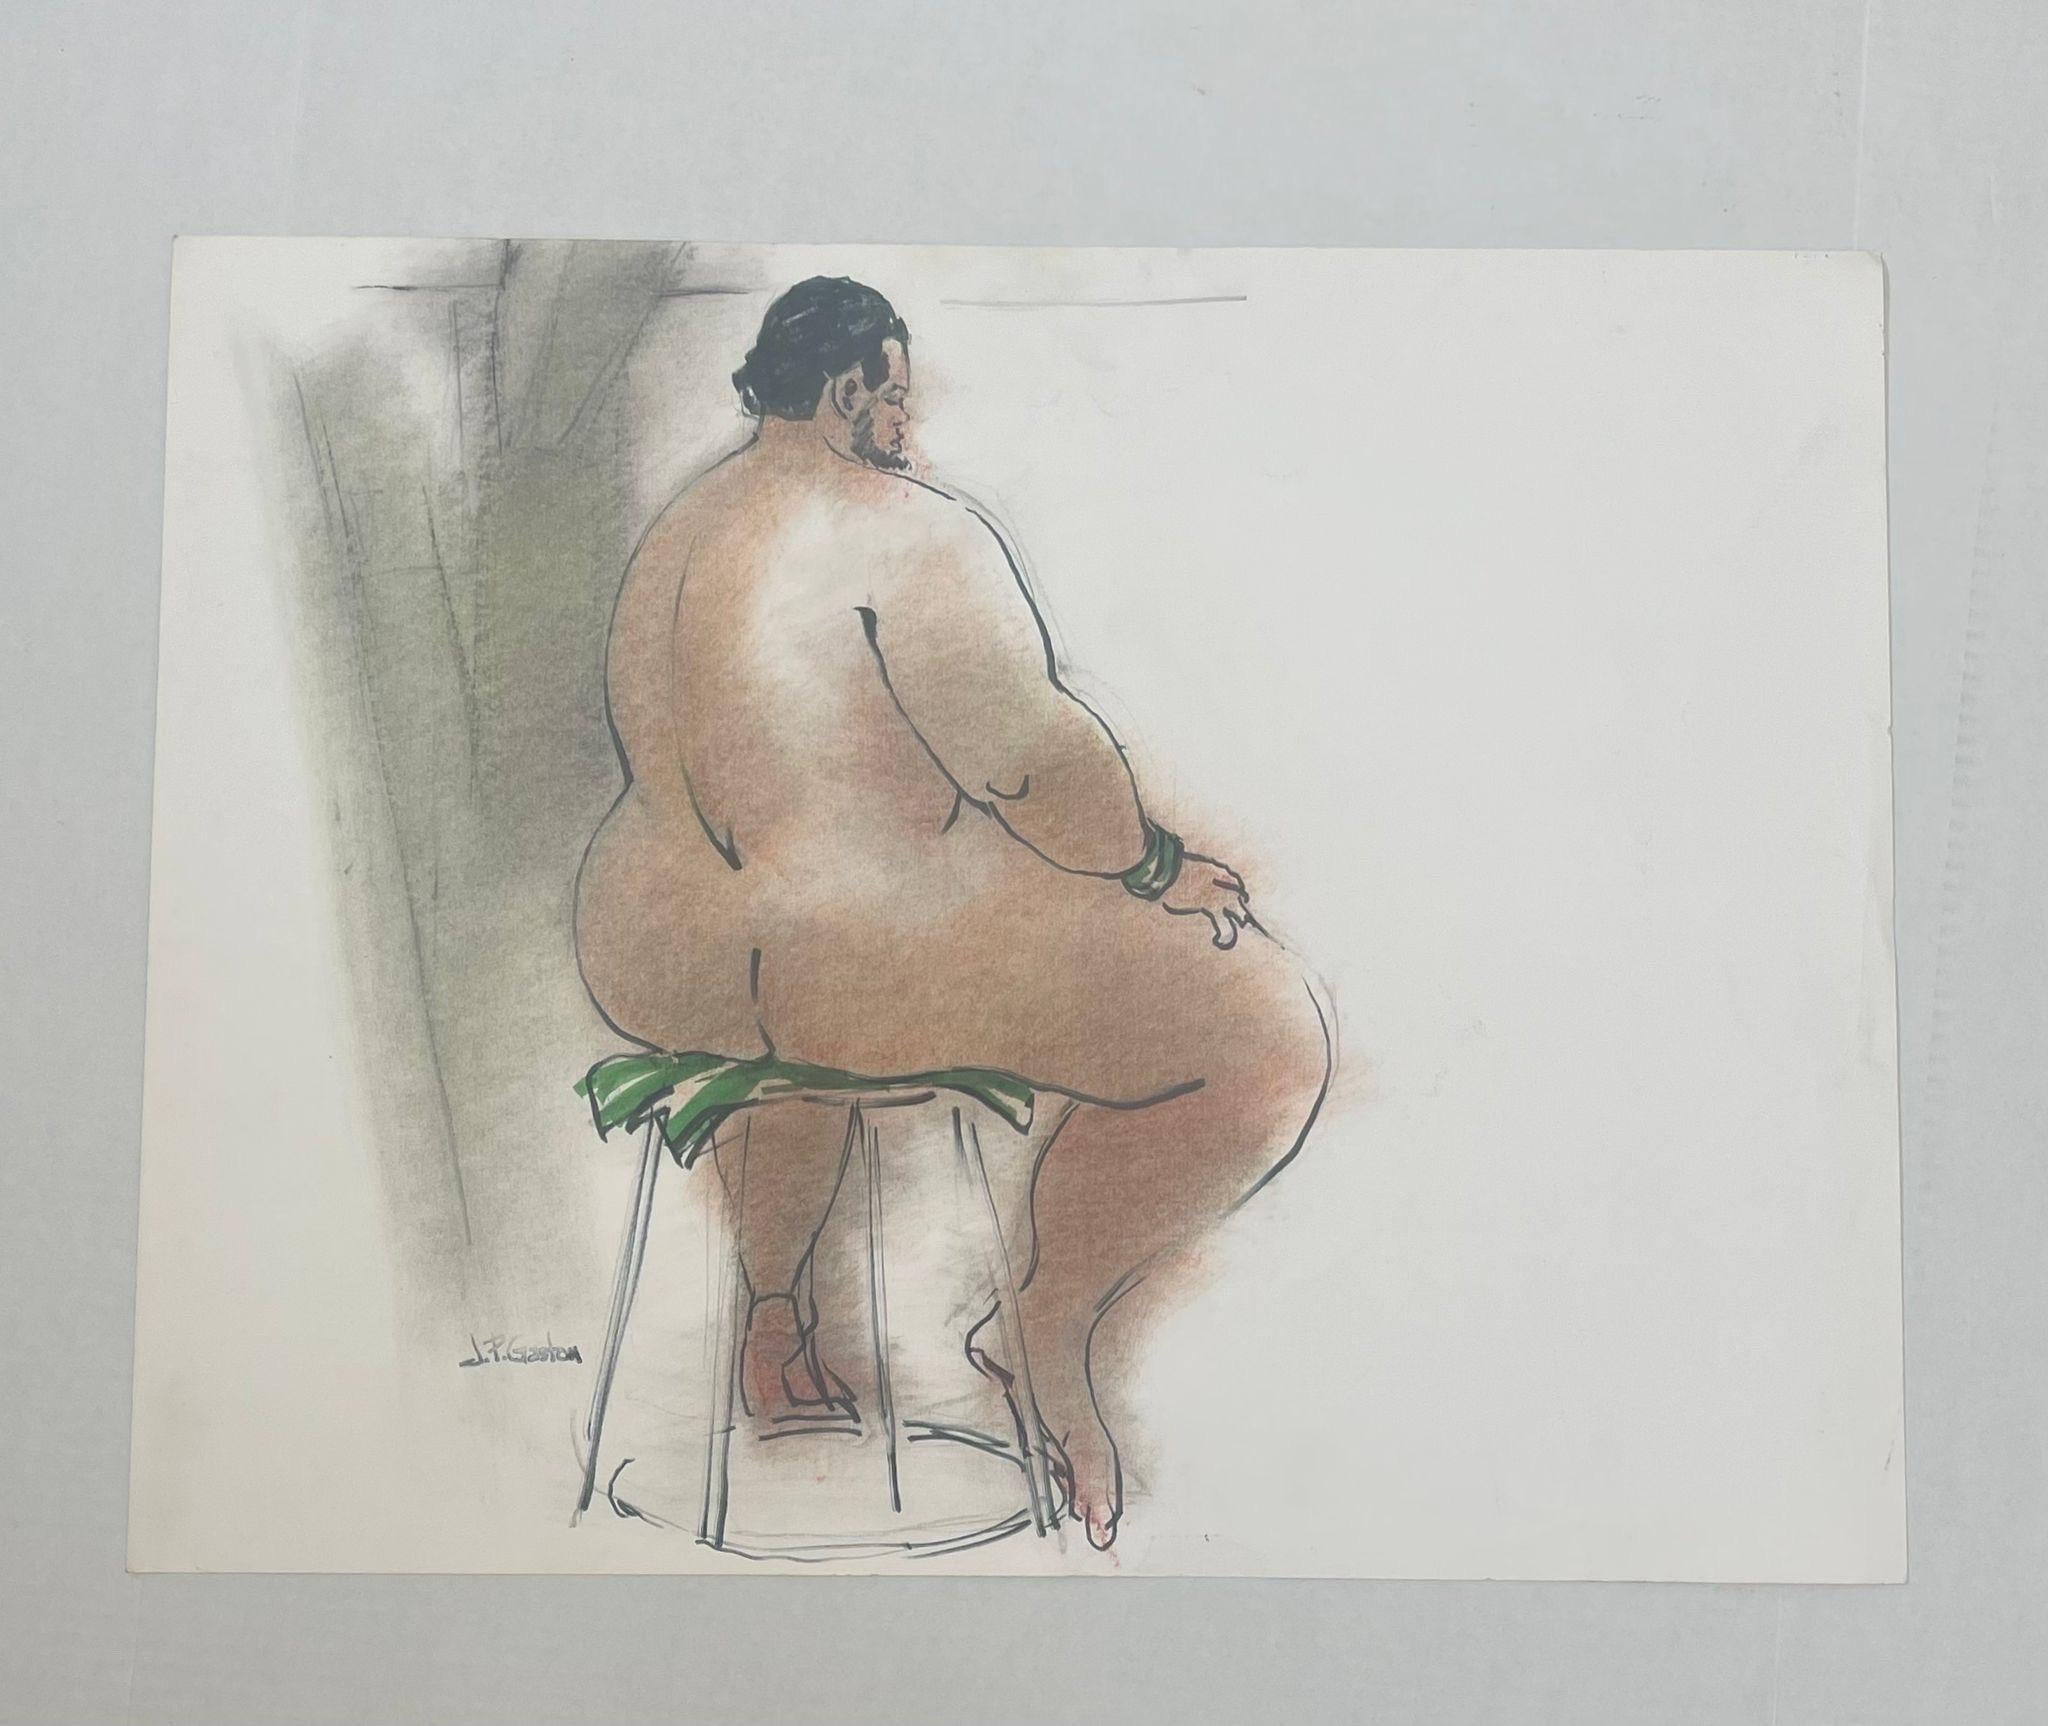 Vintage Nude Portrait Study of a Sitting Man.Appears to be Pastel on Paper.Signed JP Gaston as Pictured. Wear and Tear Consistent with Age.

Dimensions. 26 W ; 20 H